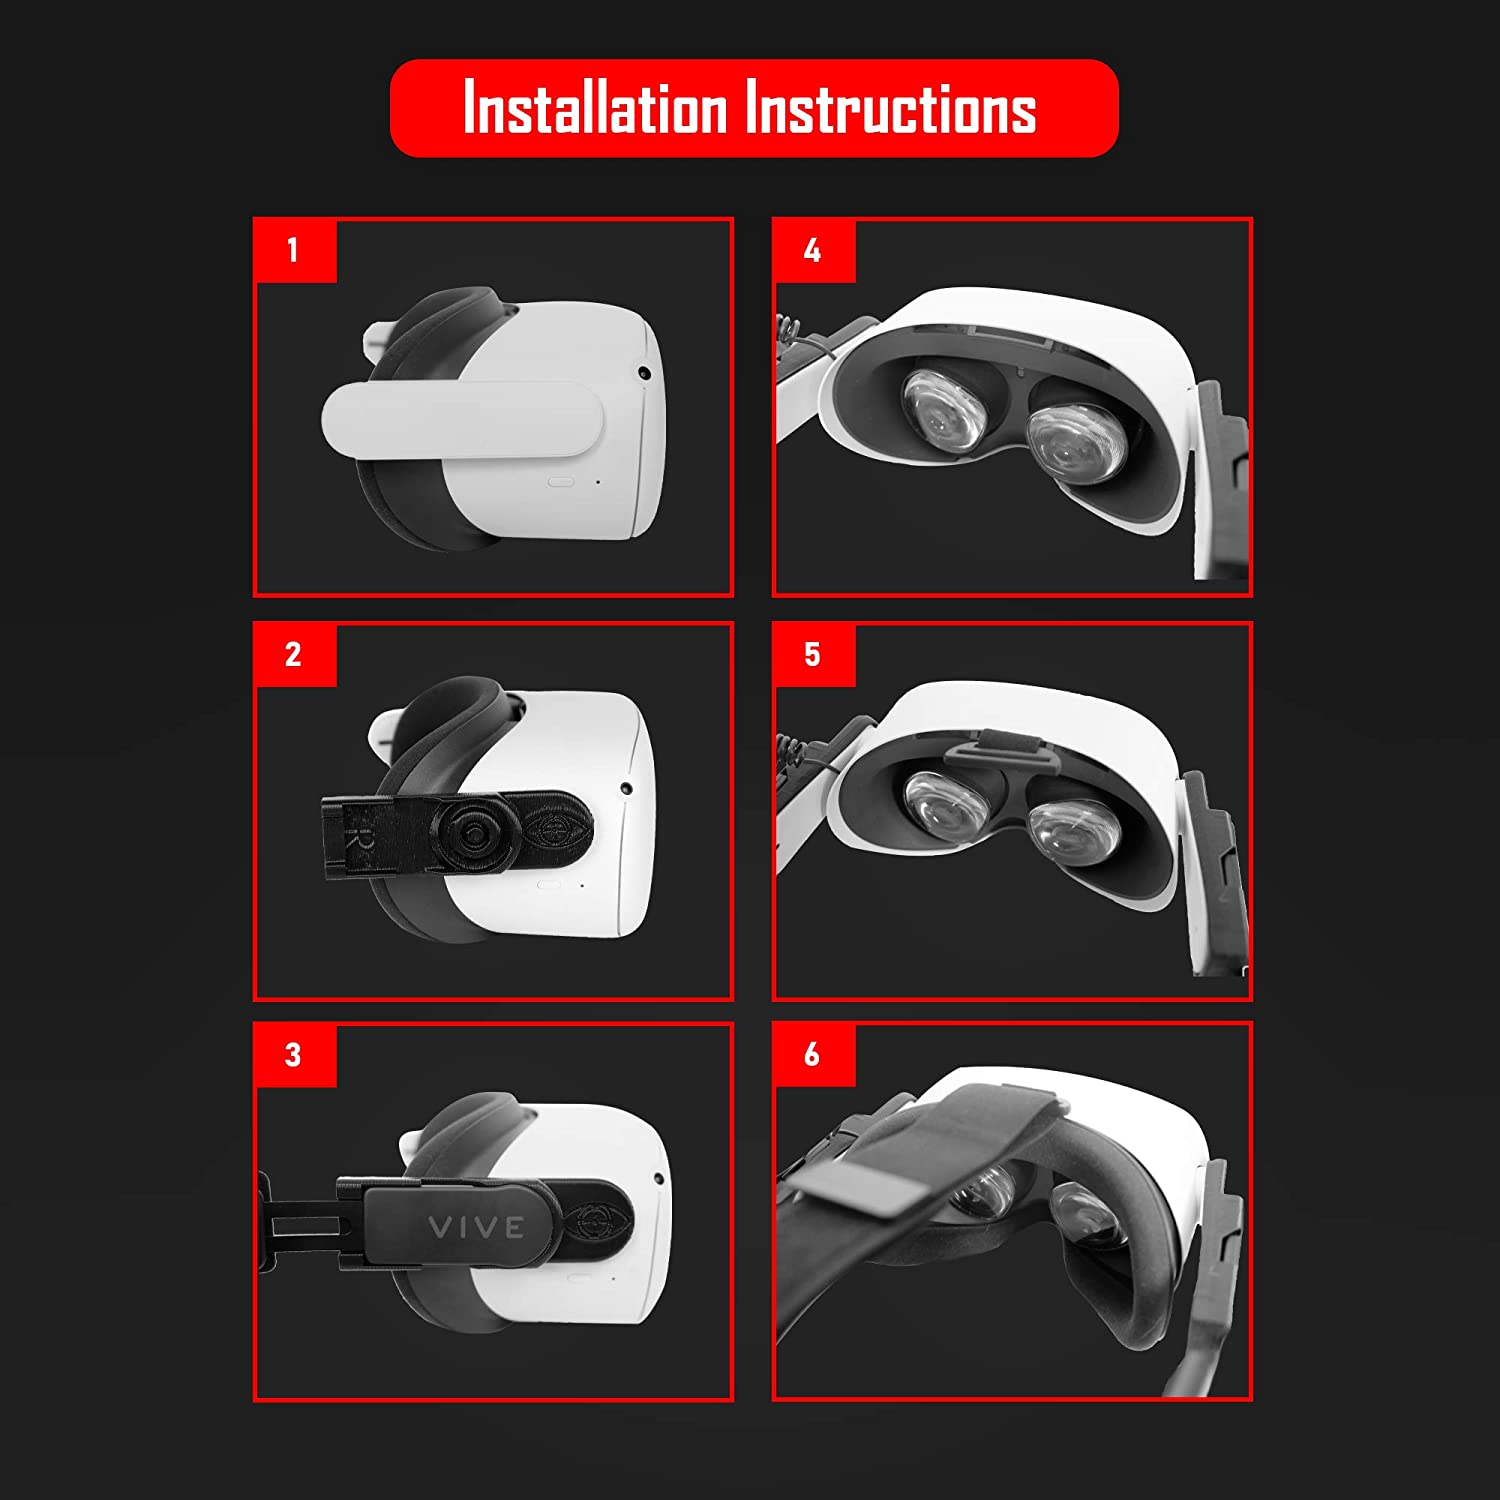 Installation instructions. Shows how to set up Deluxe audio strap adapters on quest 2 headset